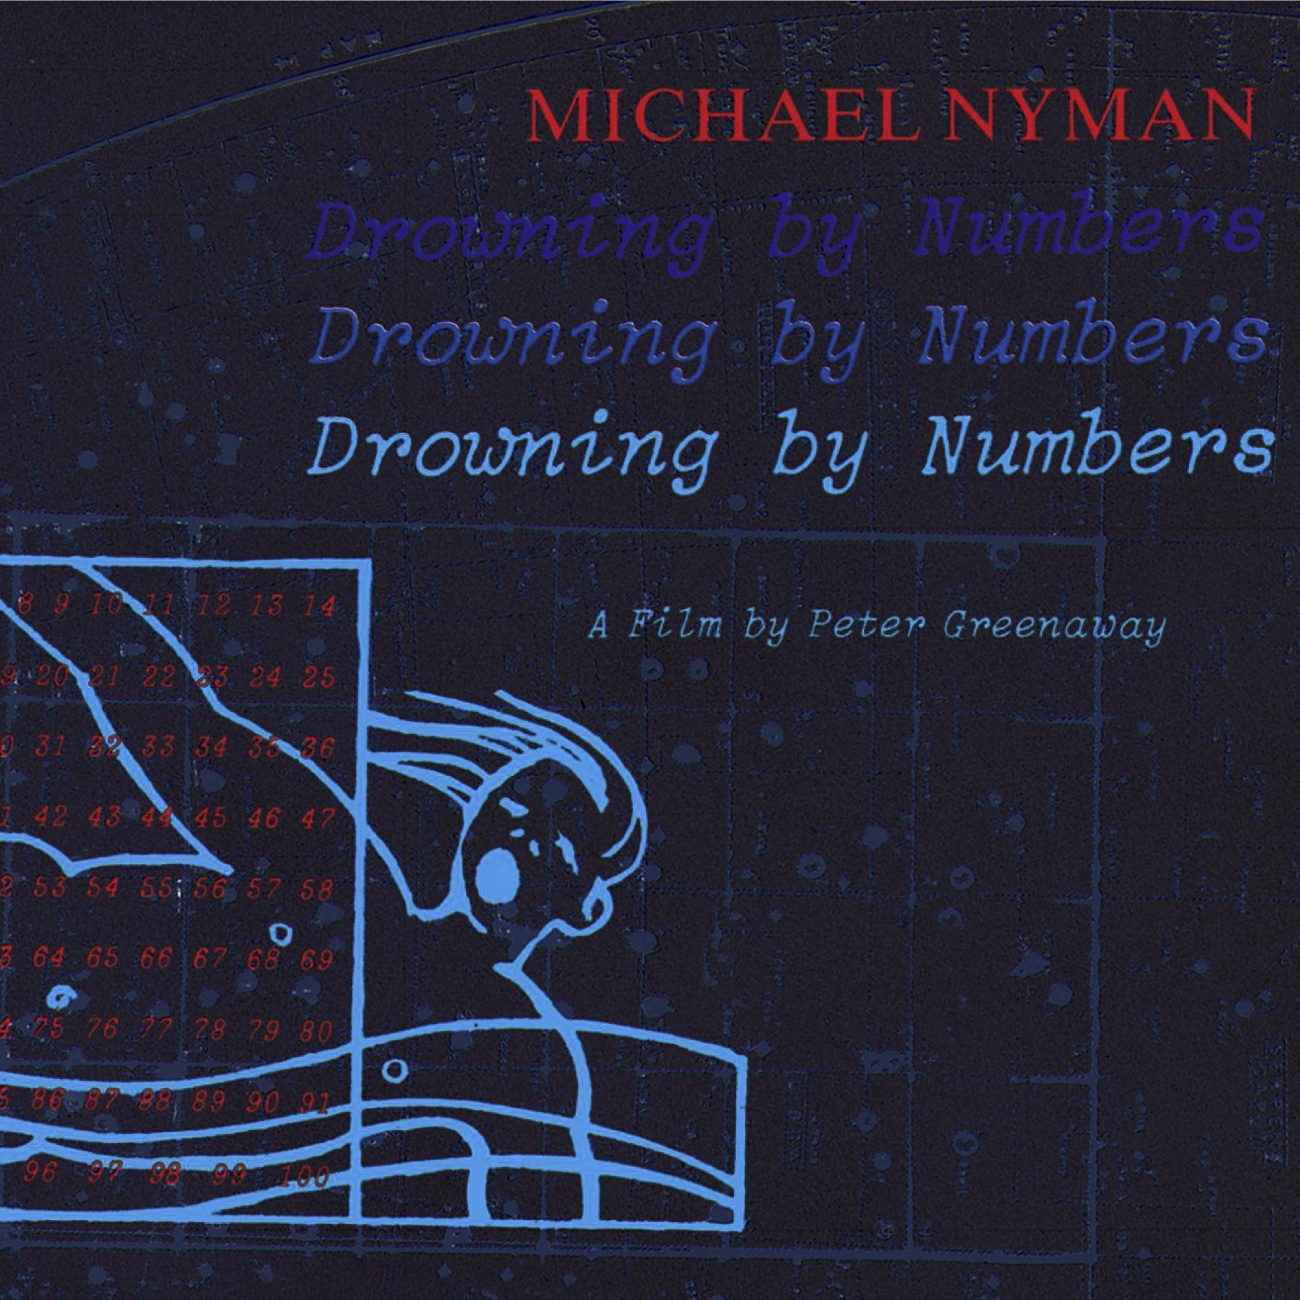 Drowning By Number 3 (2004 Digital Remaster)